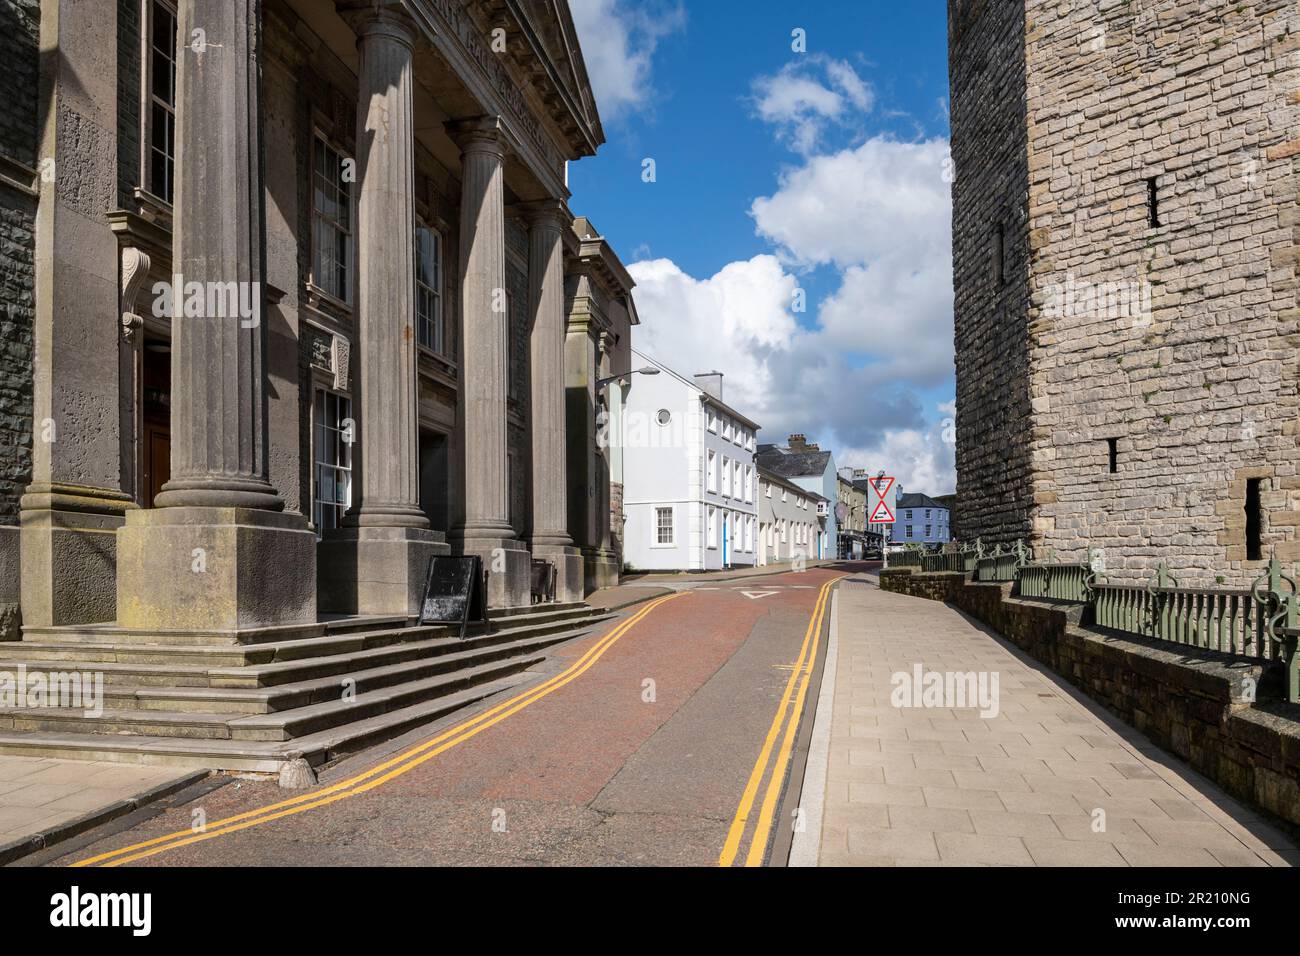 The old courthouse at Castle Ditch, Caernarfon, Gwynedd, North Wales Stock Photo